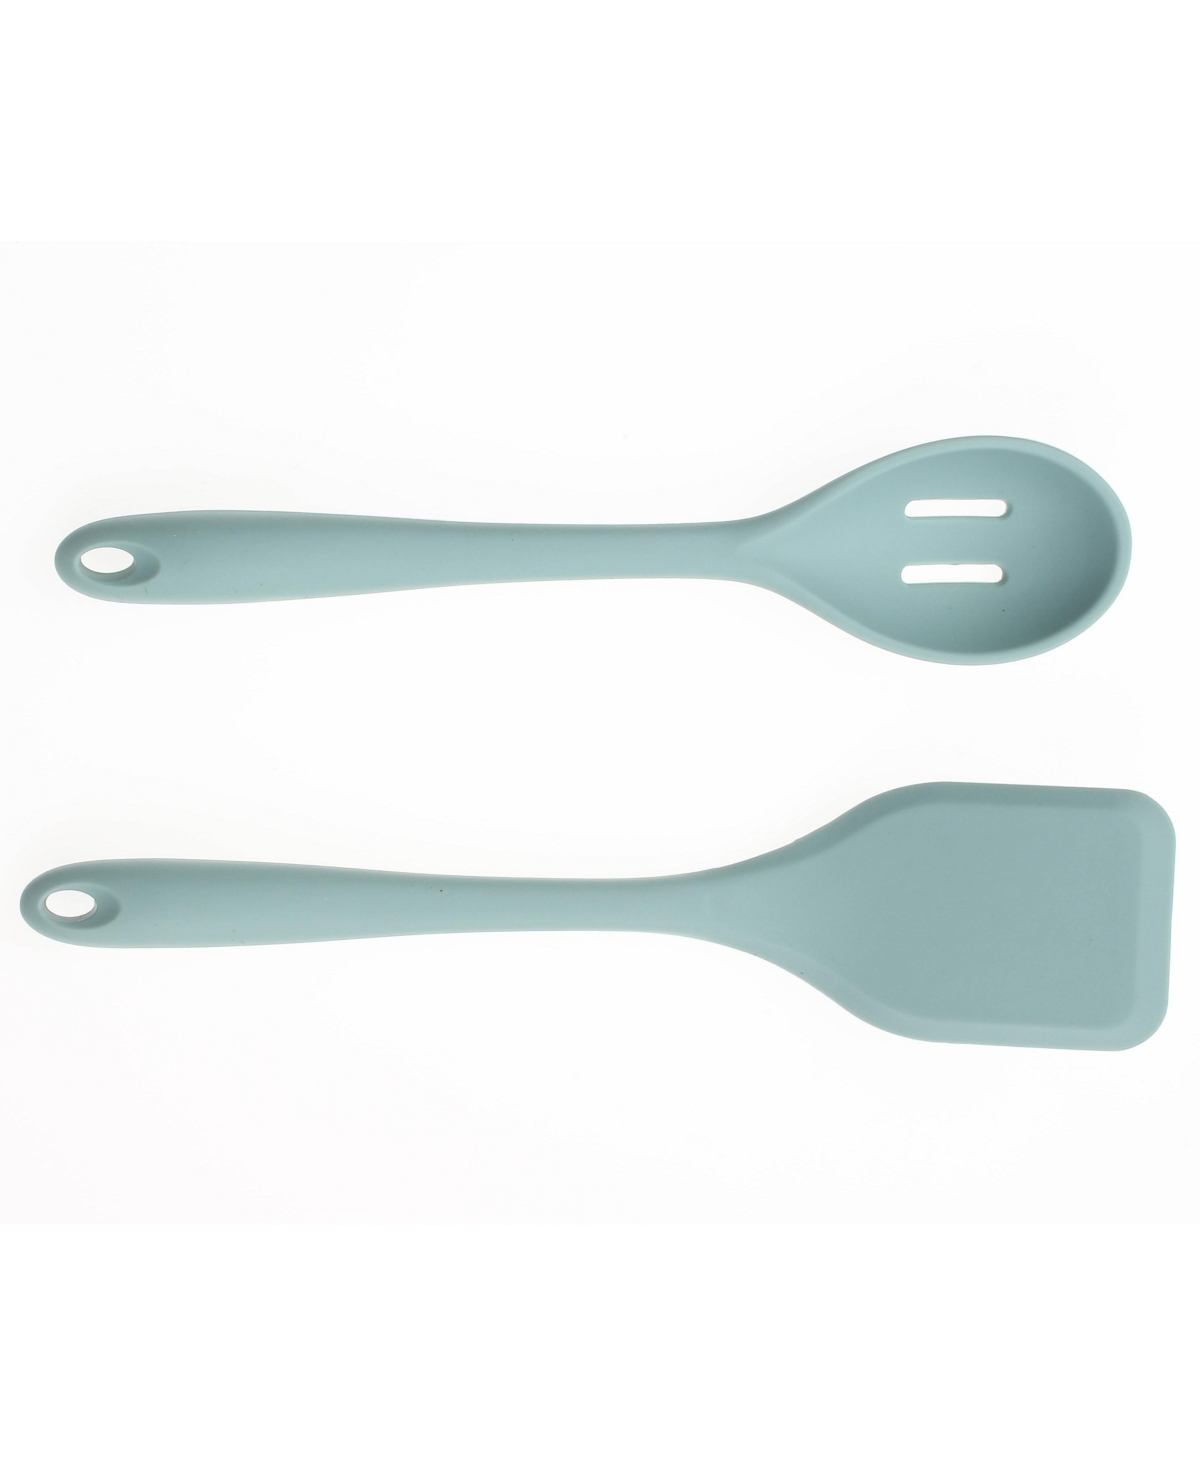 ART & COOK 2 PIECE SILICONE SOLID TURNER AND SLOTTED SPOON SET